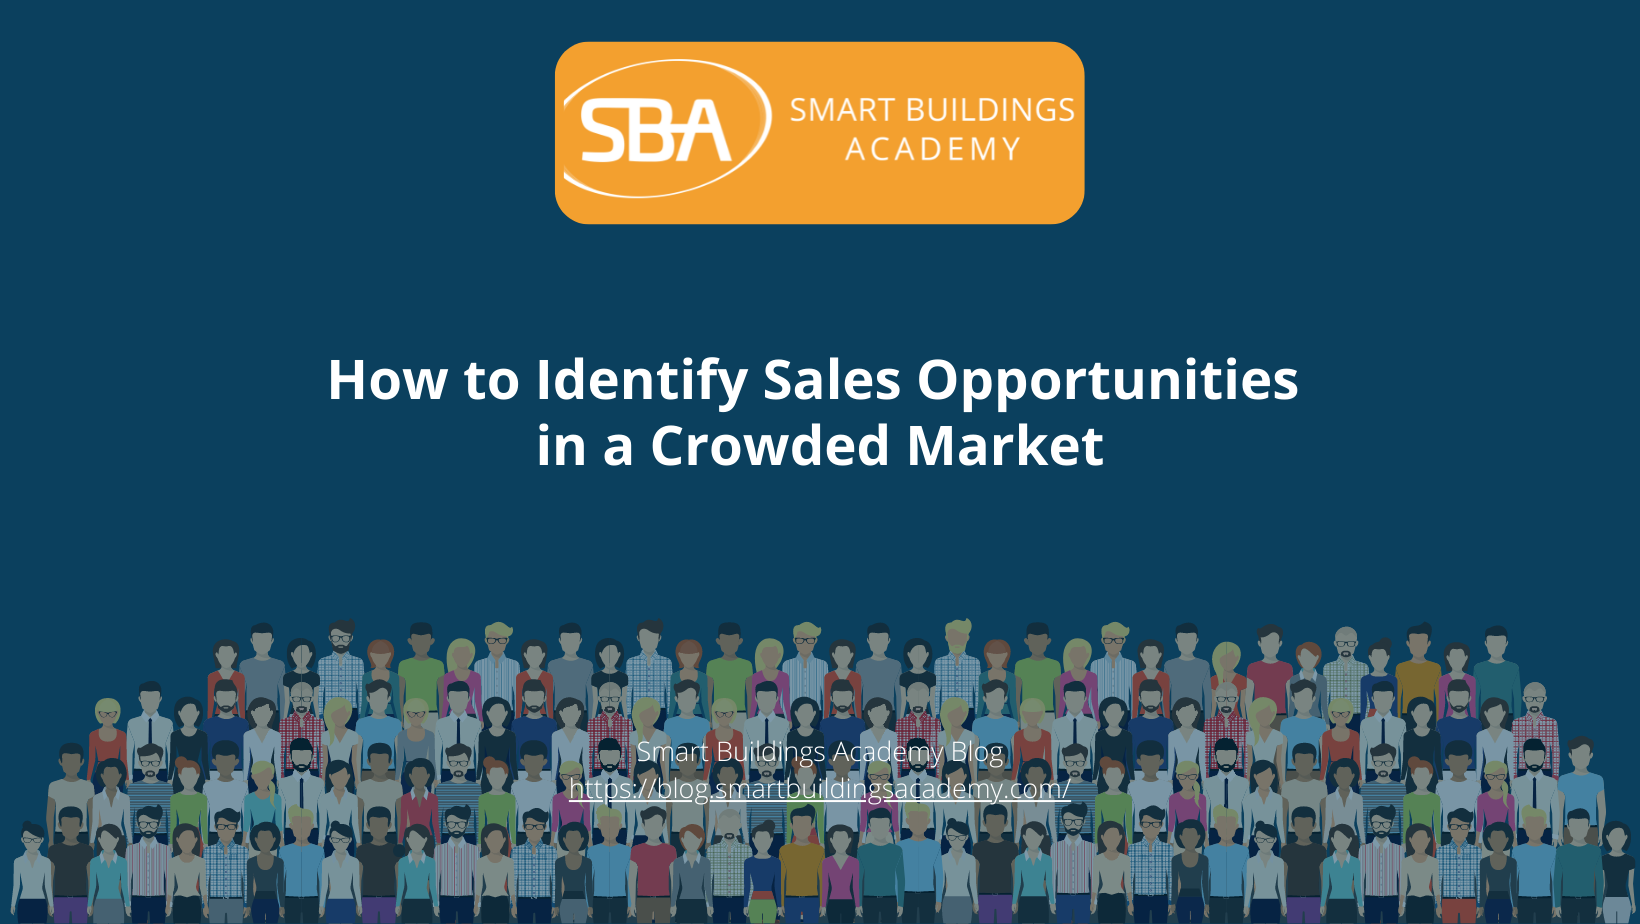 How to Identify Sales Opportunities in a Crowded Market